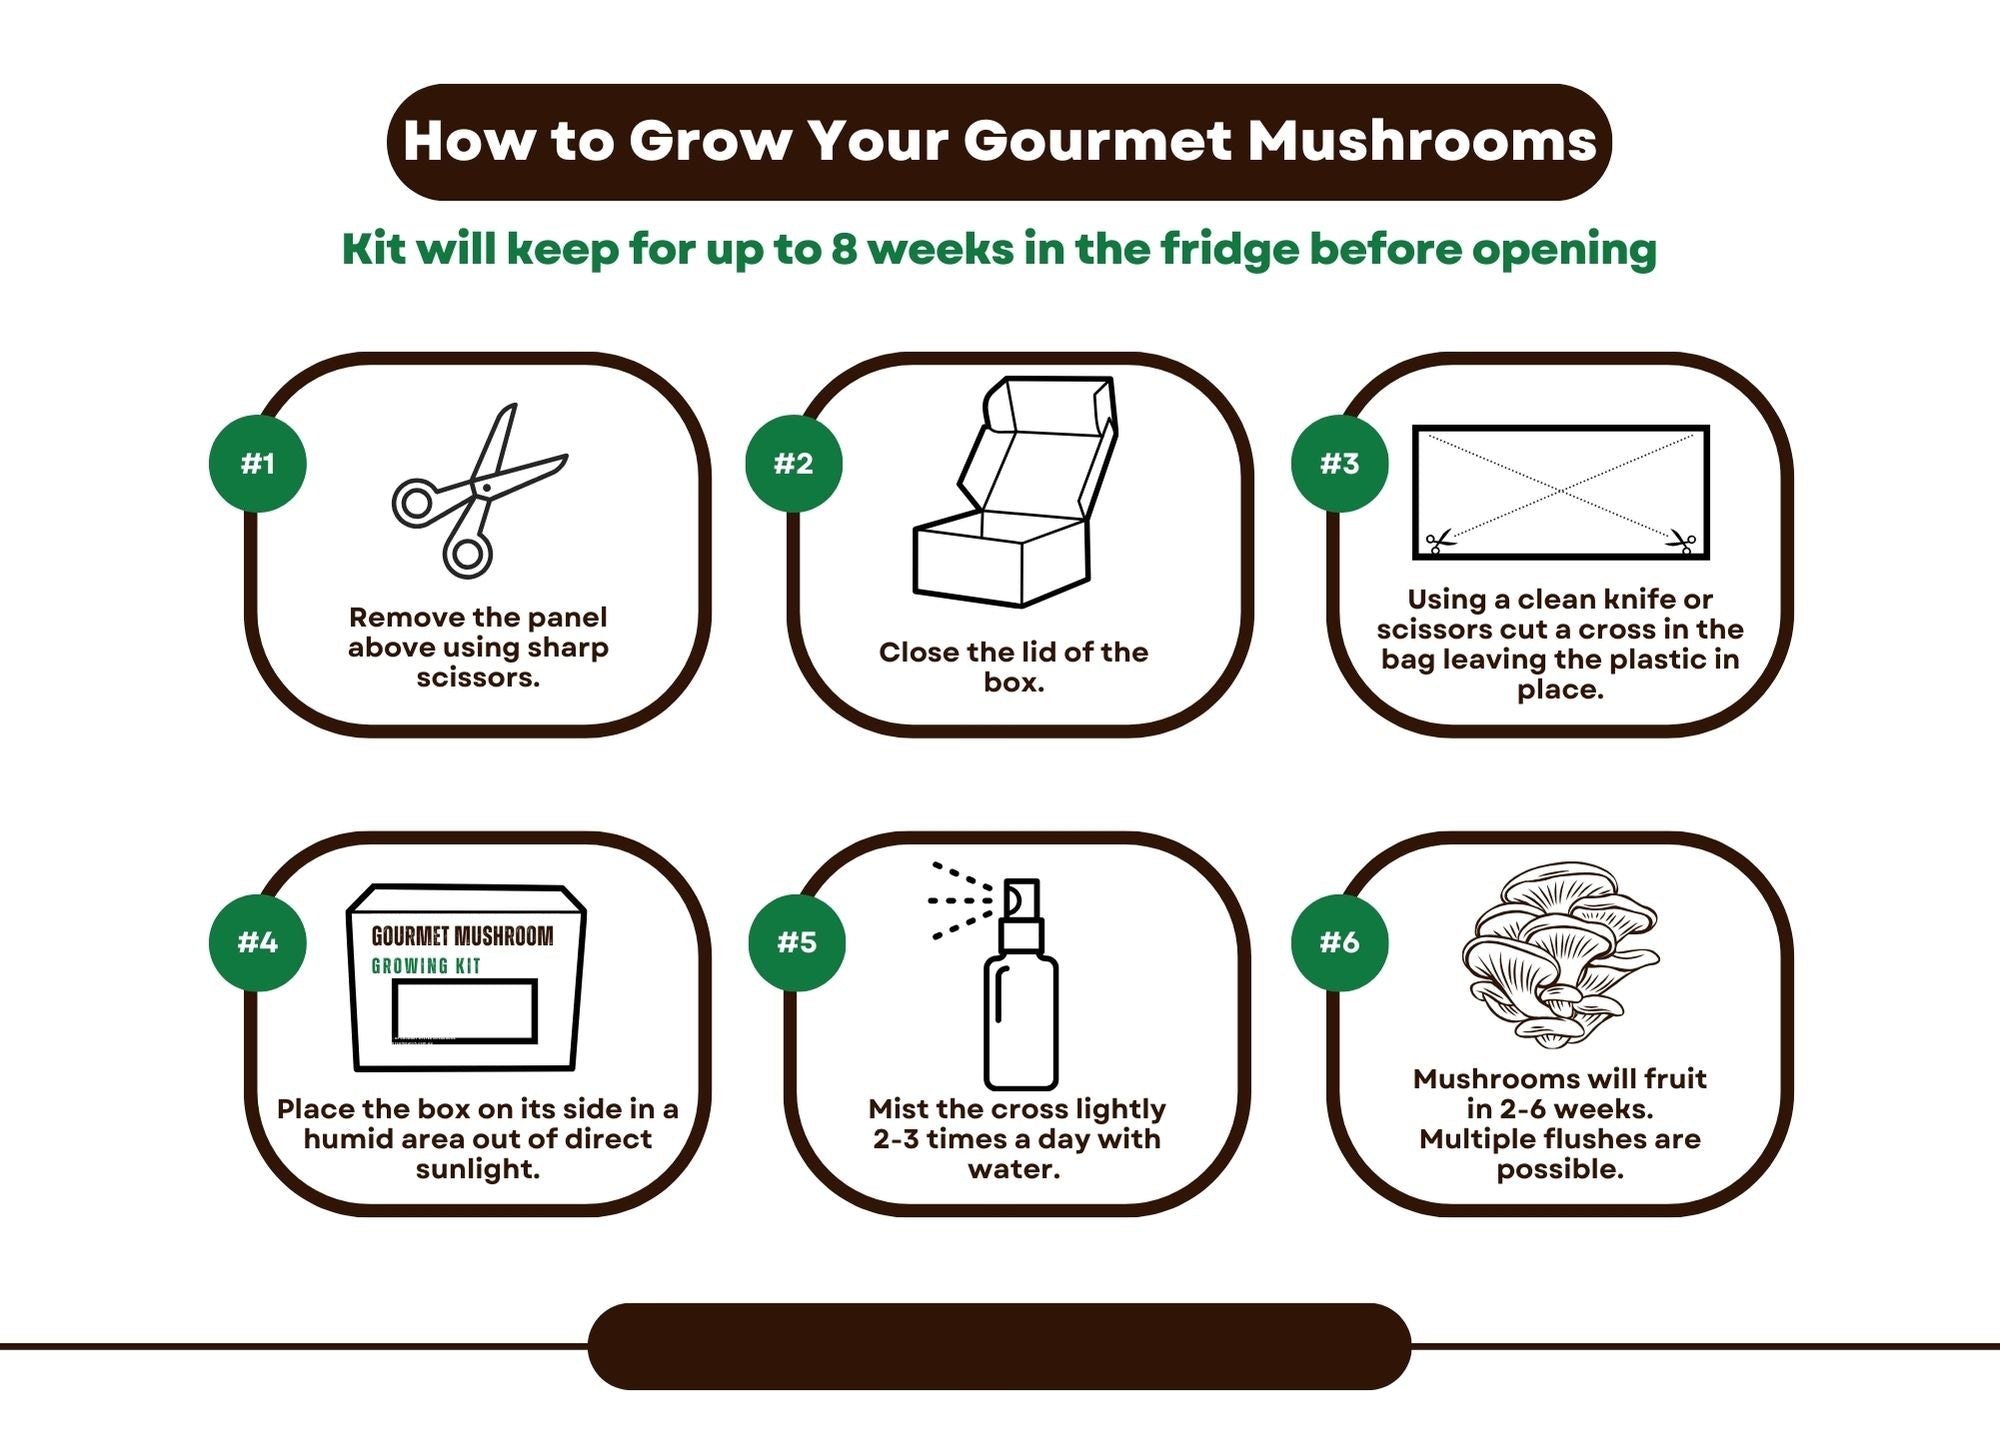 Instructions on hoe to grow your gourmet mushrooms